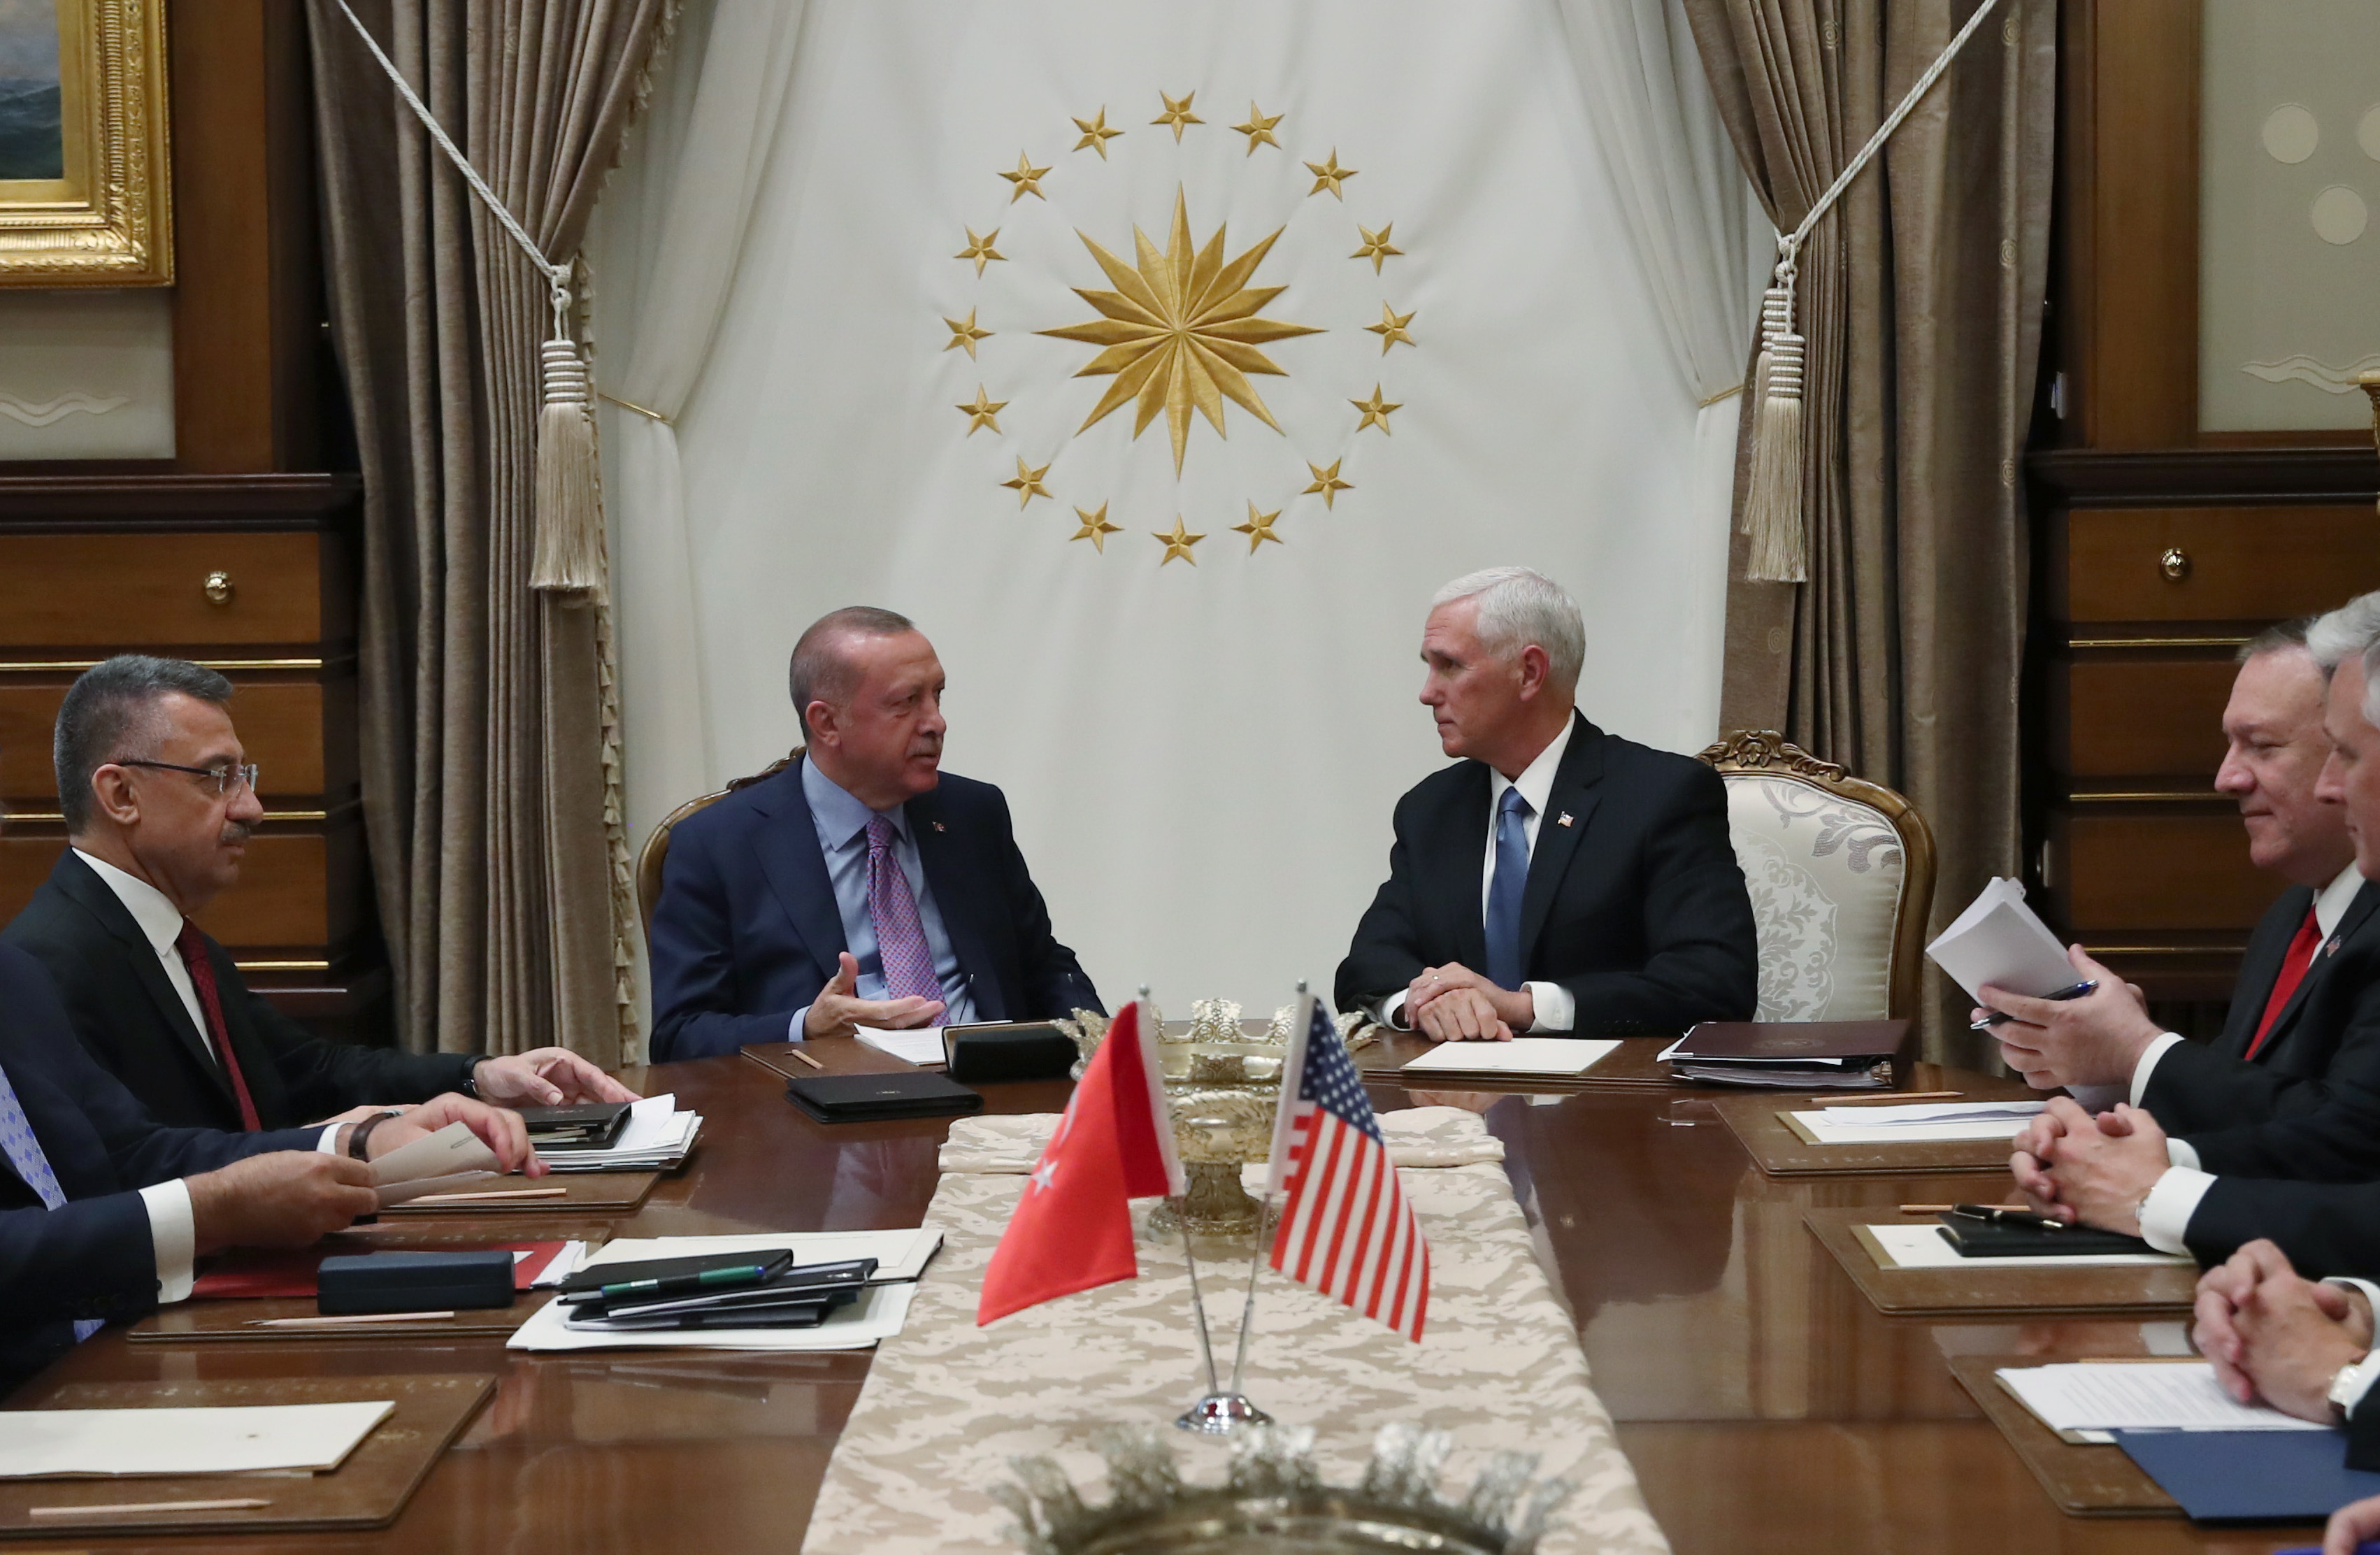 epa07927880 A handout picture provided by Turkish Presidential press office shows Turkish President Recep Tayyip Erdogan (C-L) and US Vice President Mike Pence (C-R) meet in Ankara, Turkey 17 October 2019. Pence is in Turkey for talks on Turkish military operation on Northern Syria against Kurdish fighters. Turkey has launched an offensive targeting Kurdish forces in north-eastern Syria, days after the US withdrew troops from the area.  EPA/PRESIDENTIAL PRESS OFFICE HANDOUT  HANDOUT EDITORIAL USE ONLY/NO SALES HANDOUT EDITORIAL USE ONLY/NO SALES